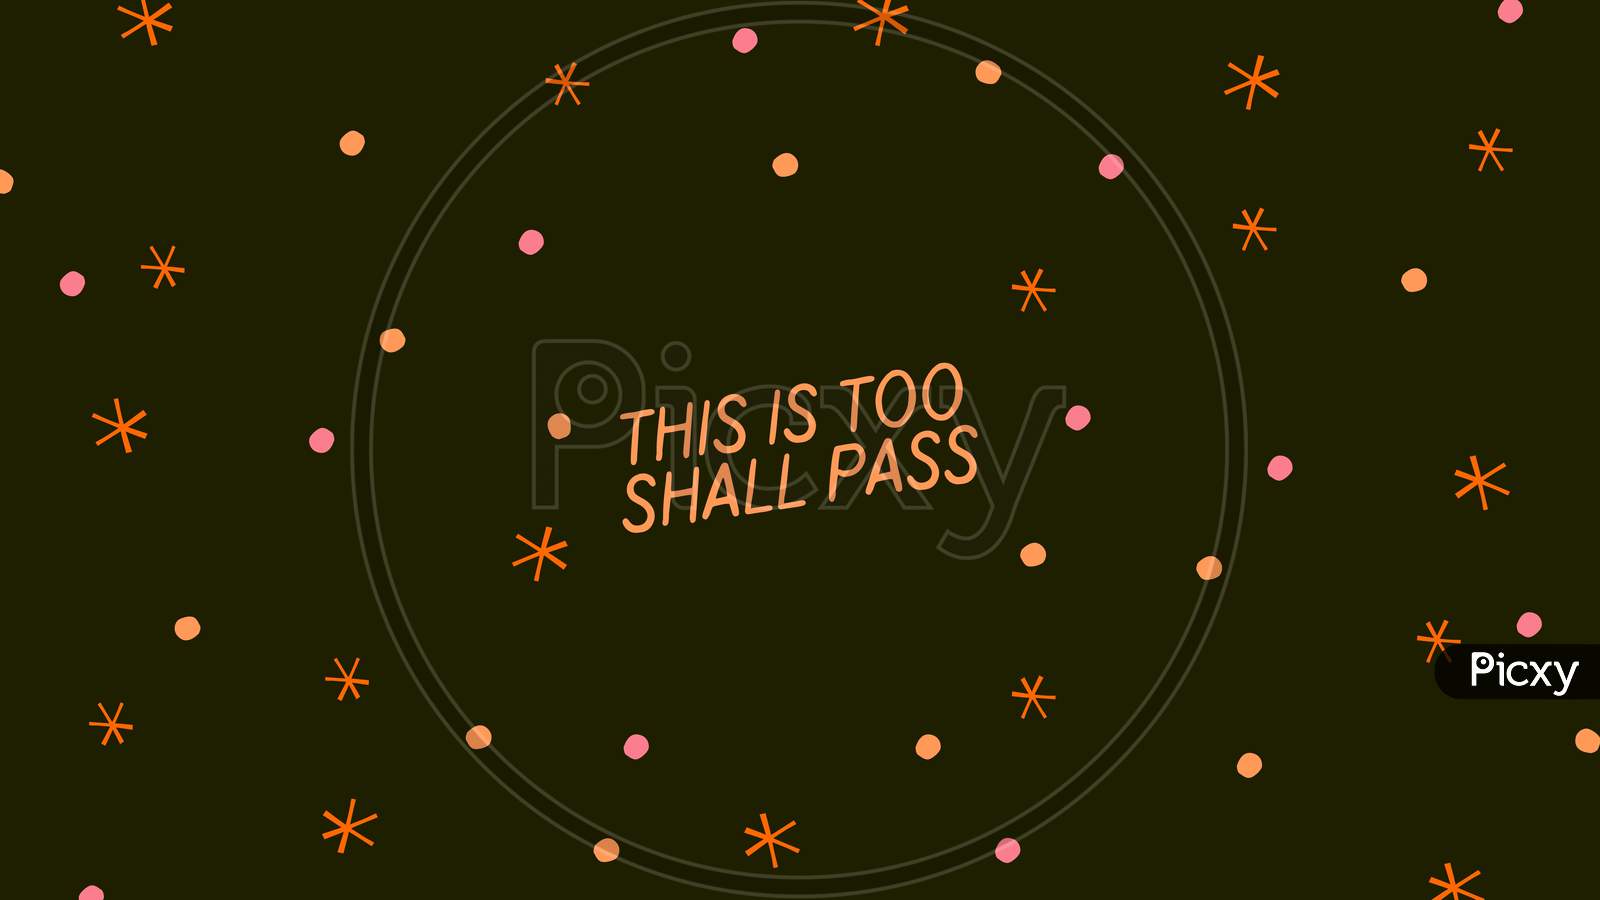 This too shall pass  Life quotes wallpaper This too shall pass This too  shall pass quote